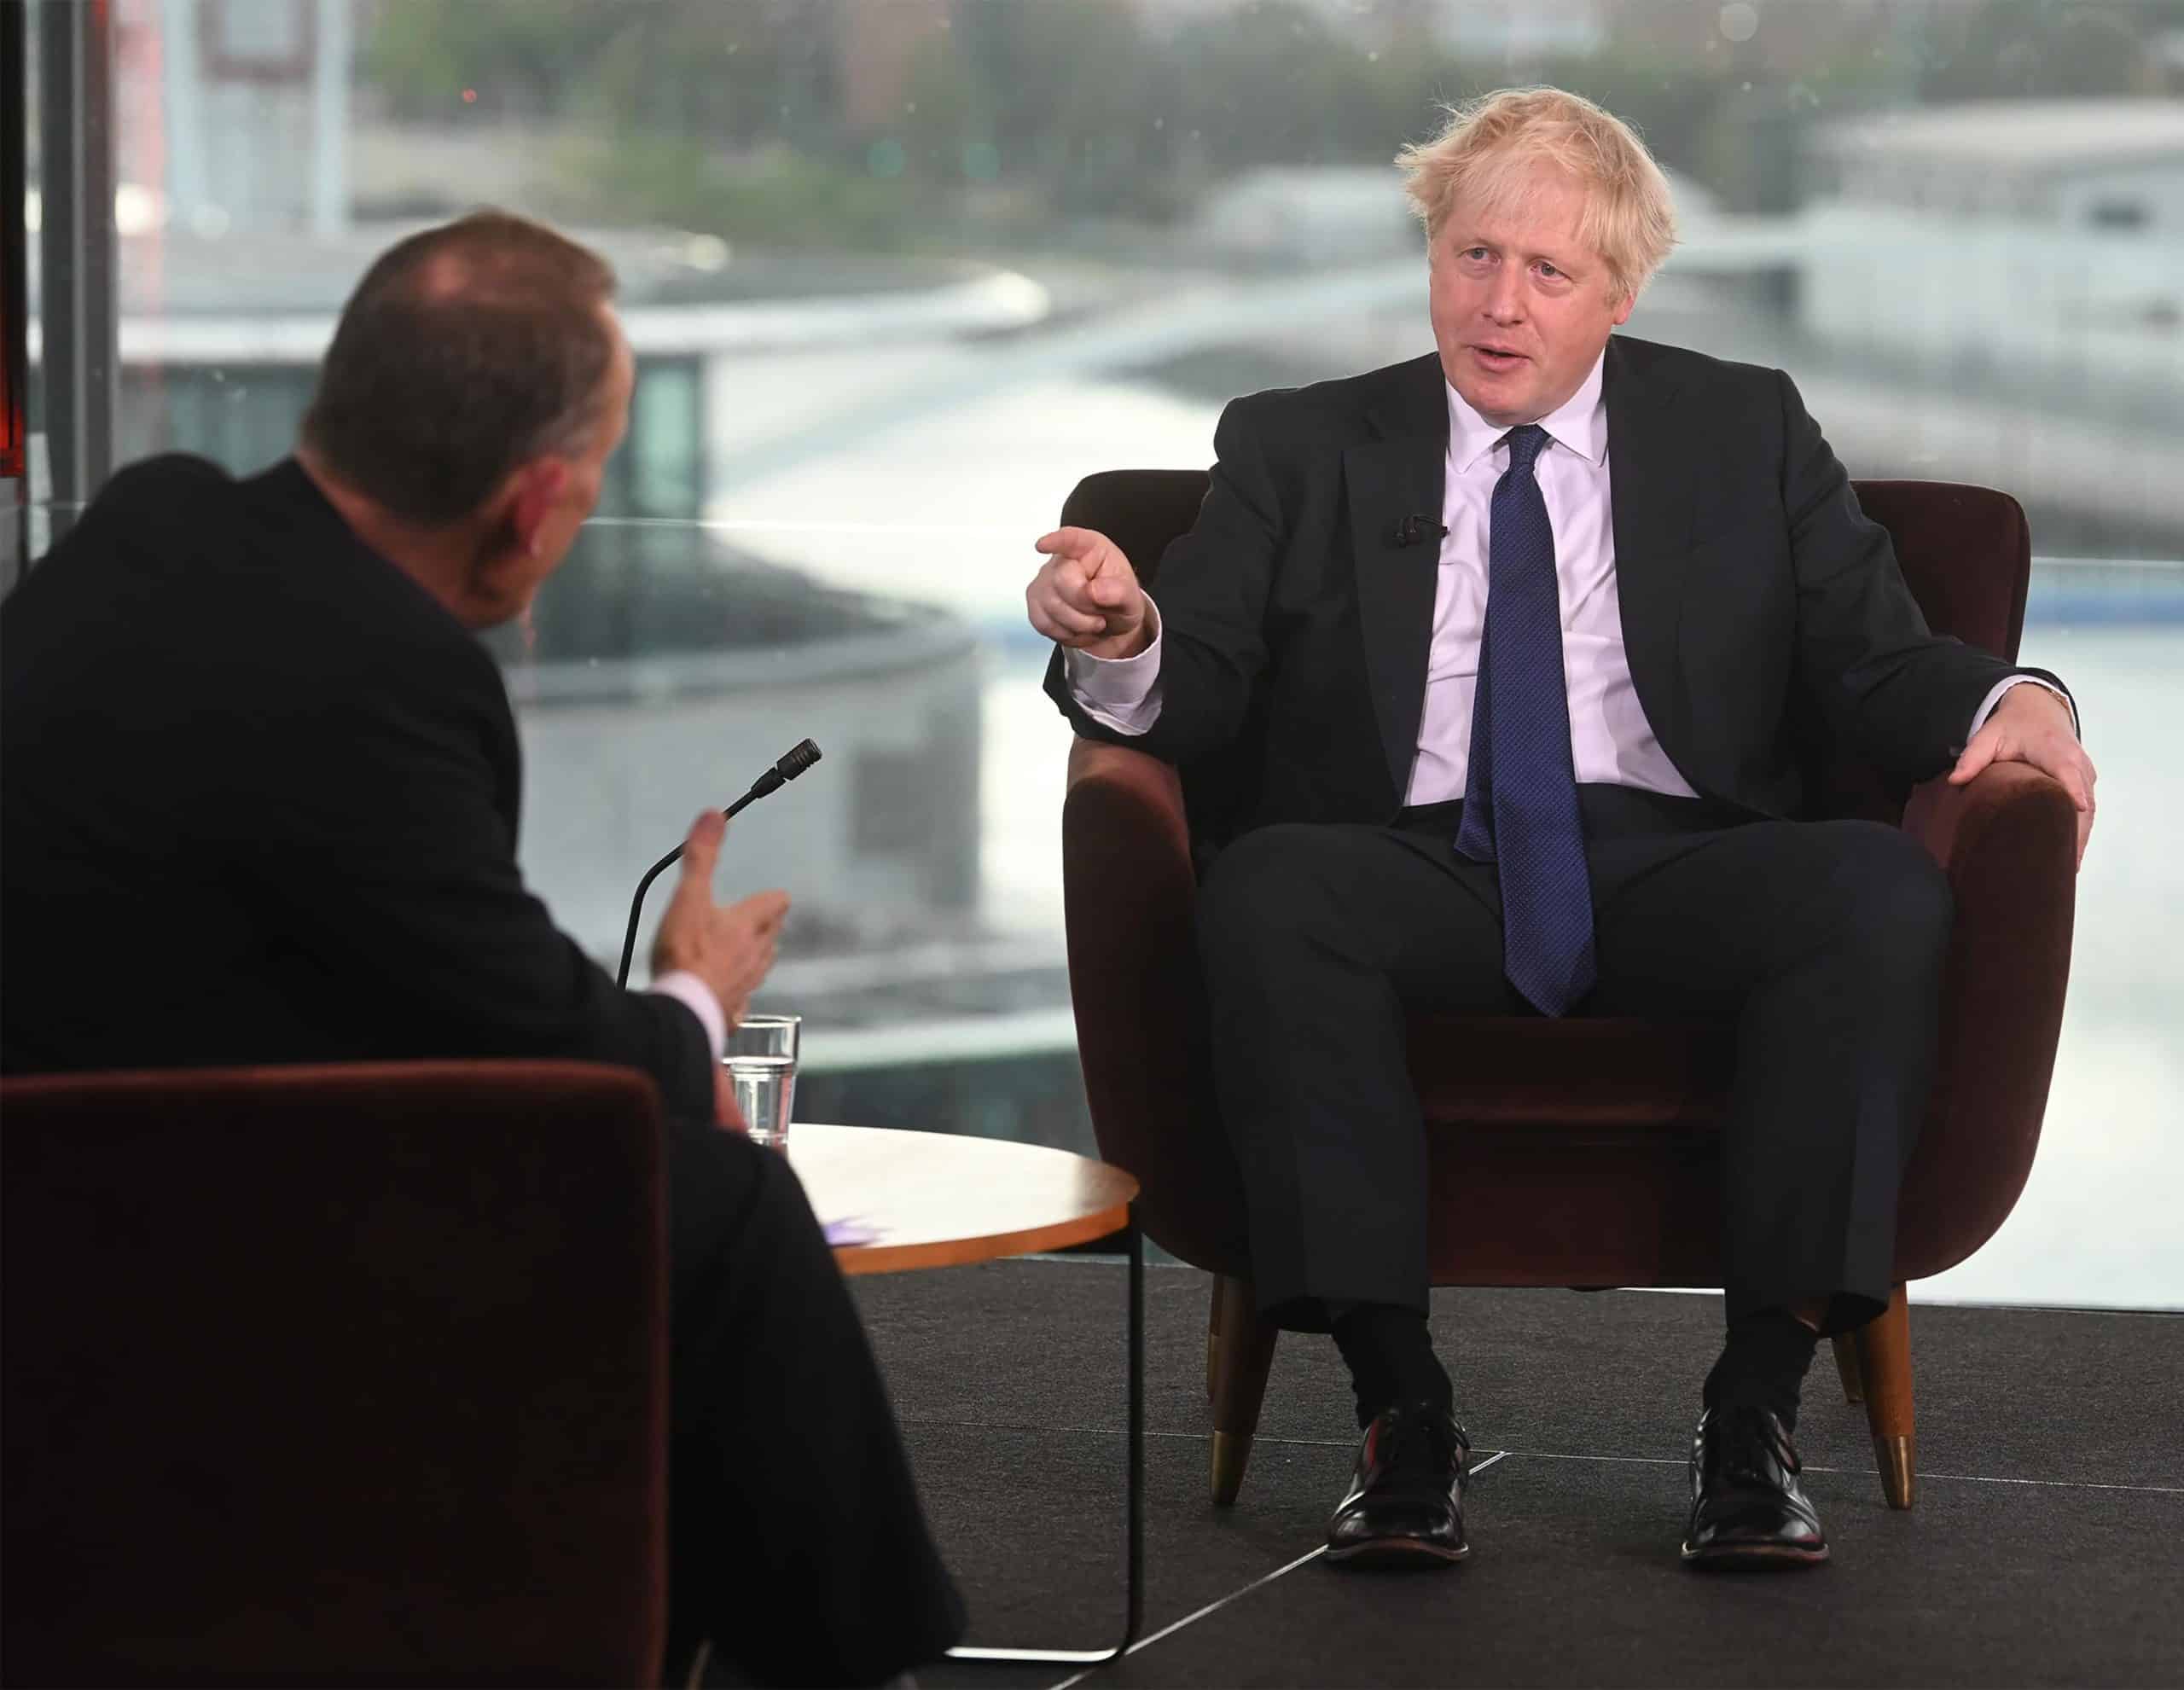 Two for two! BBC fact checks another Boris Johnson claim